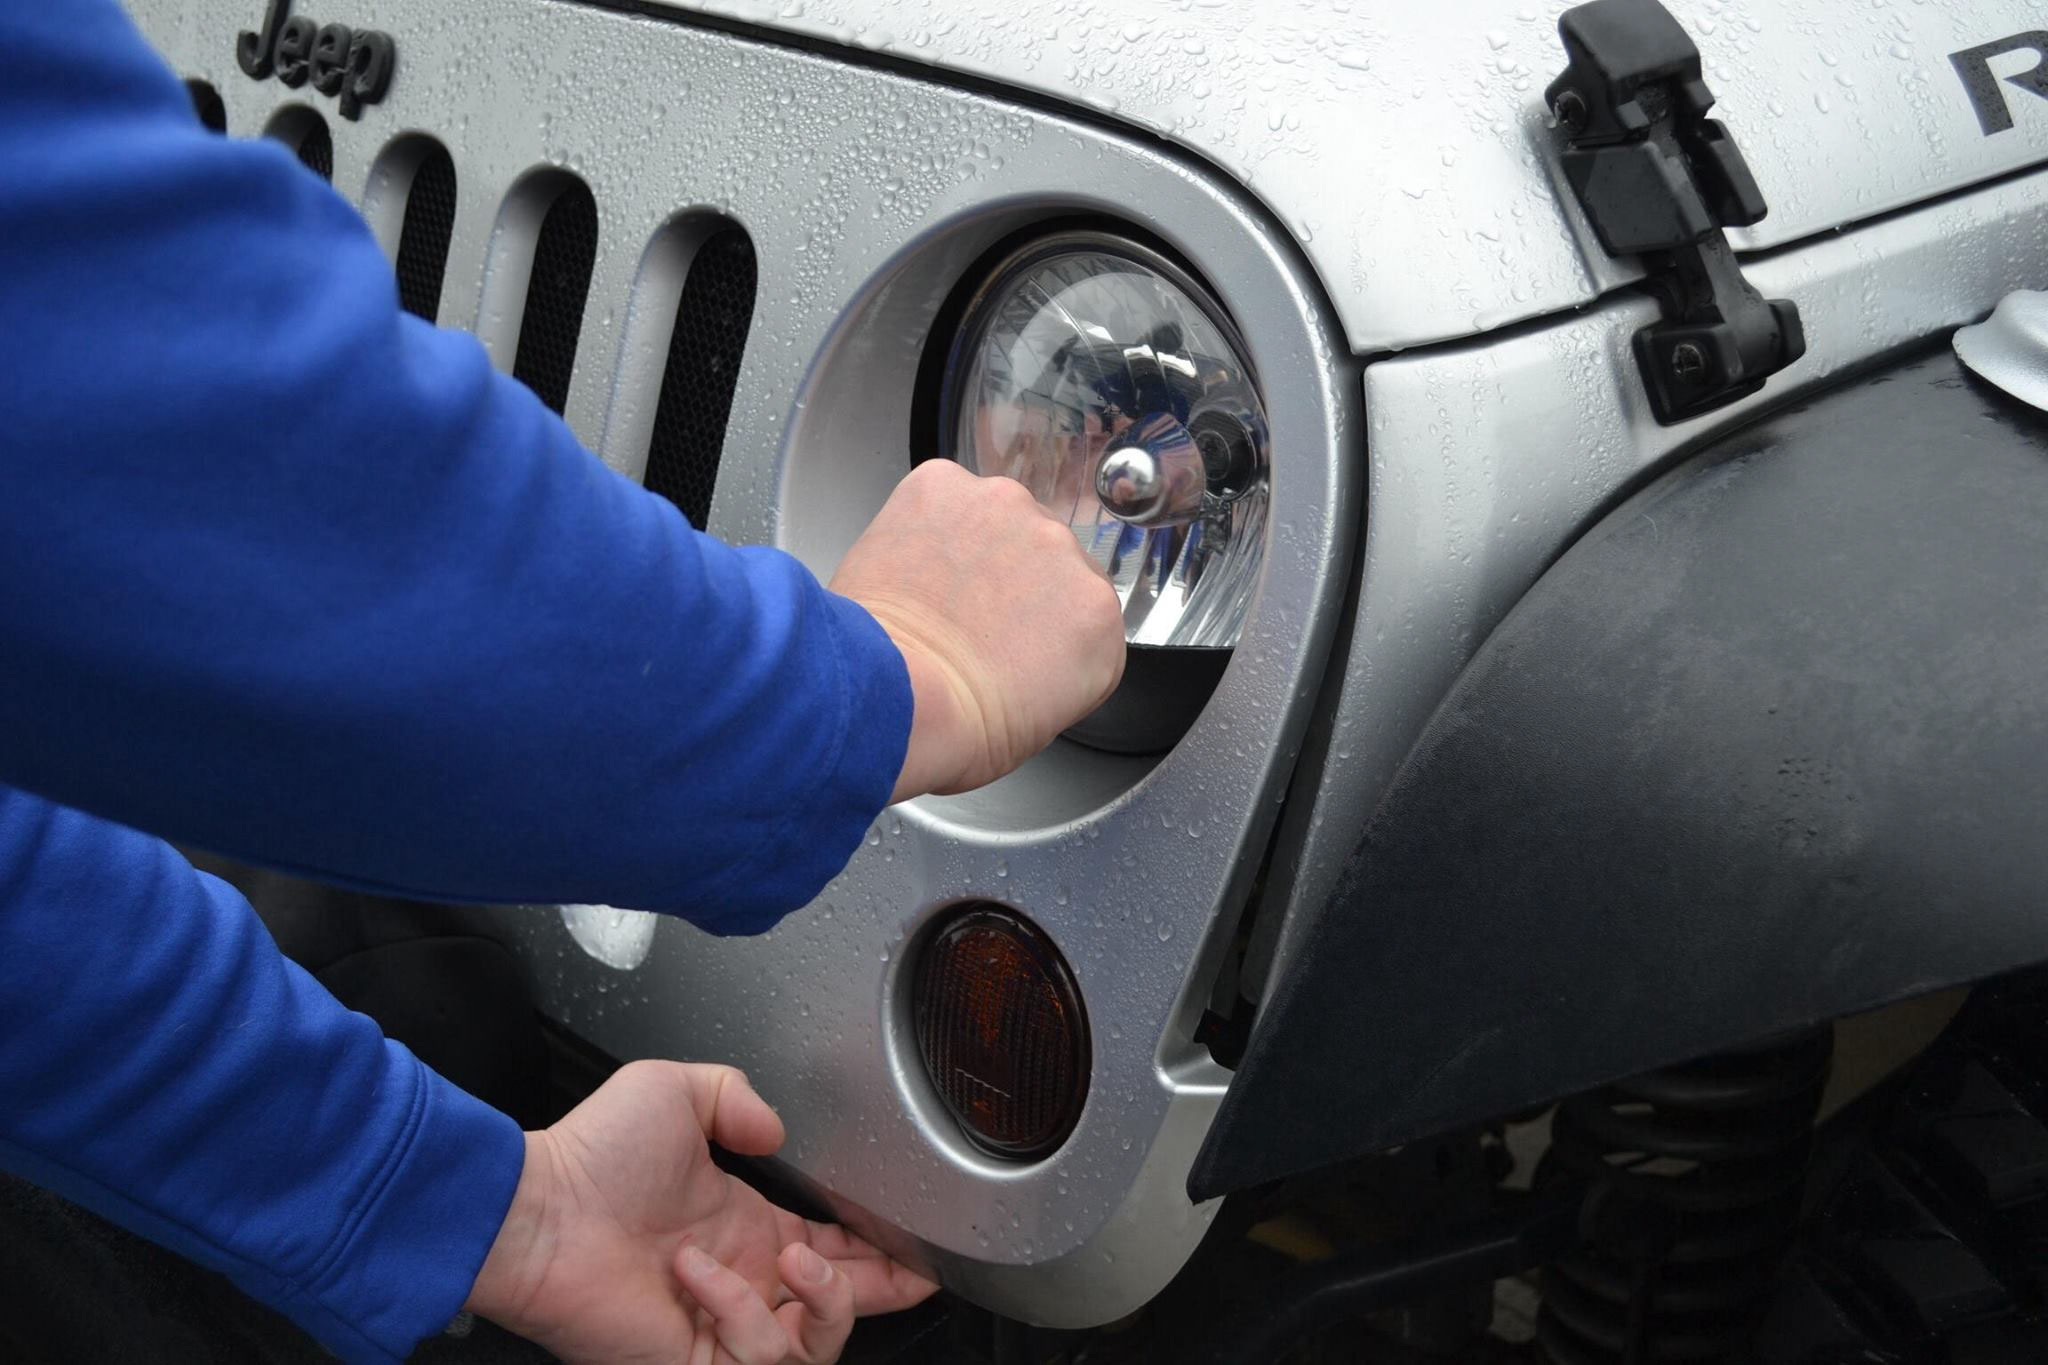 How to Install Jeep Angry Eyes - Angry Eyes Installation - Instructions for Jeep Angry Eyes